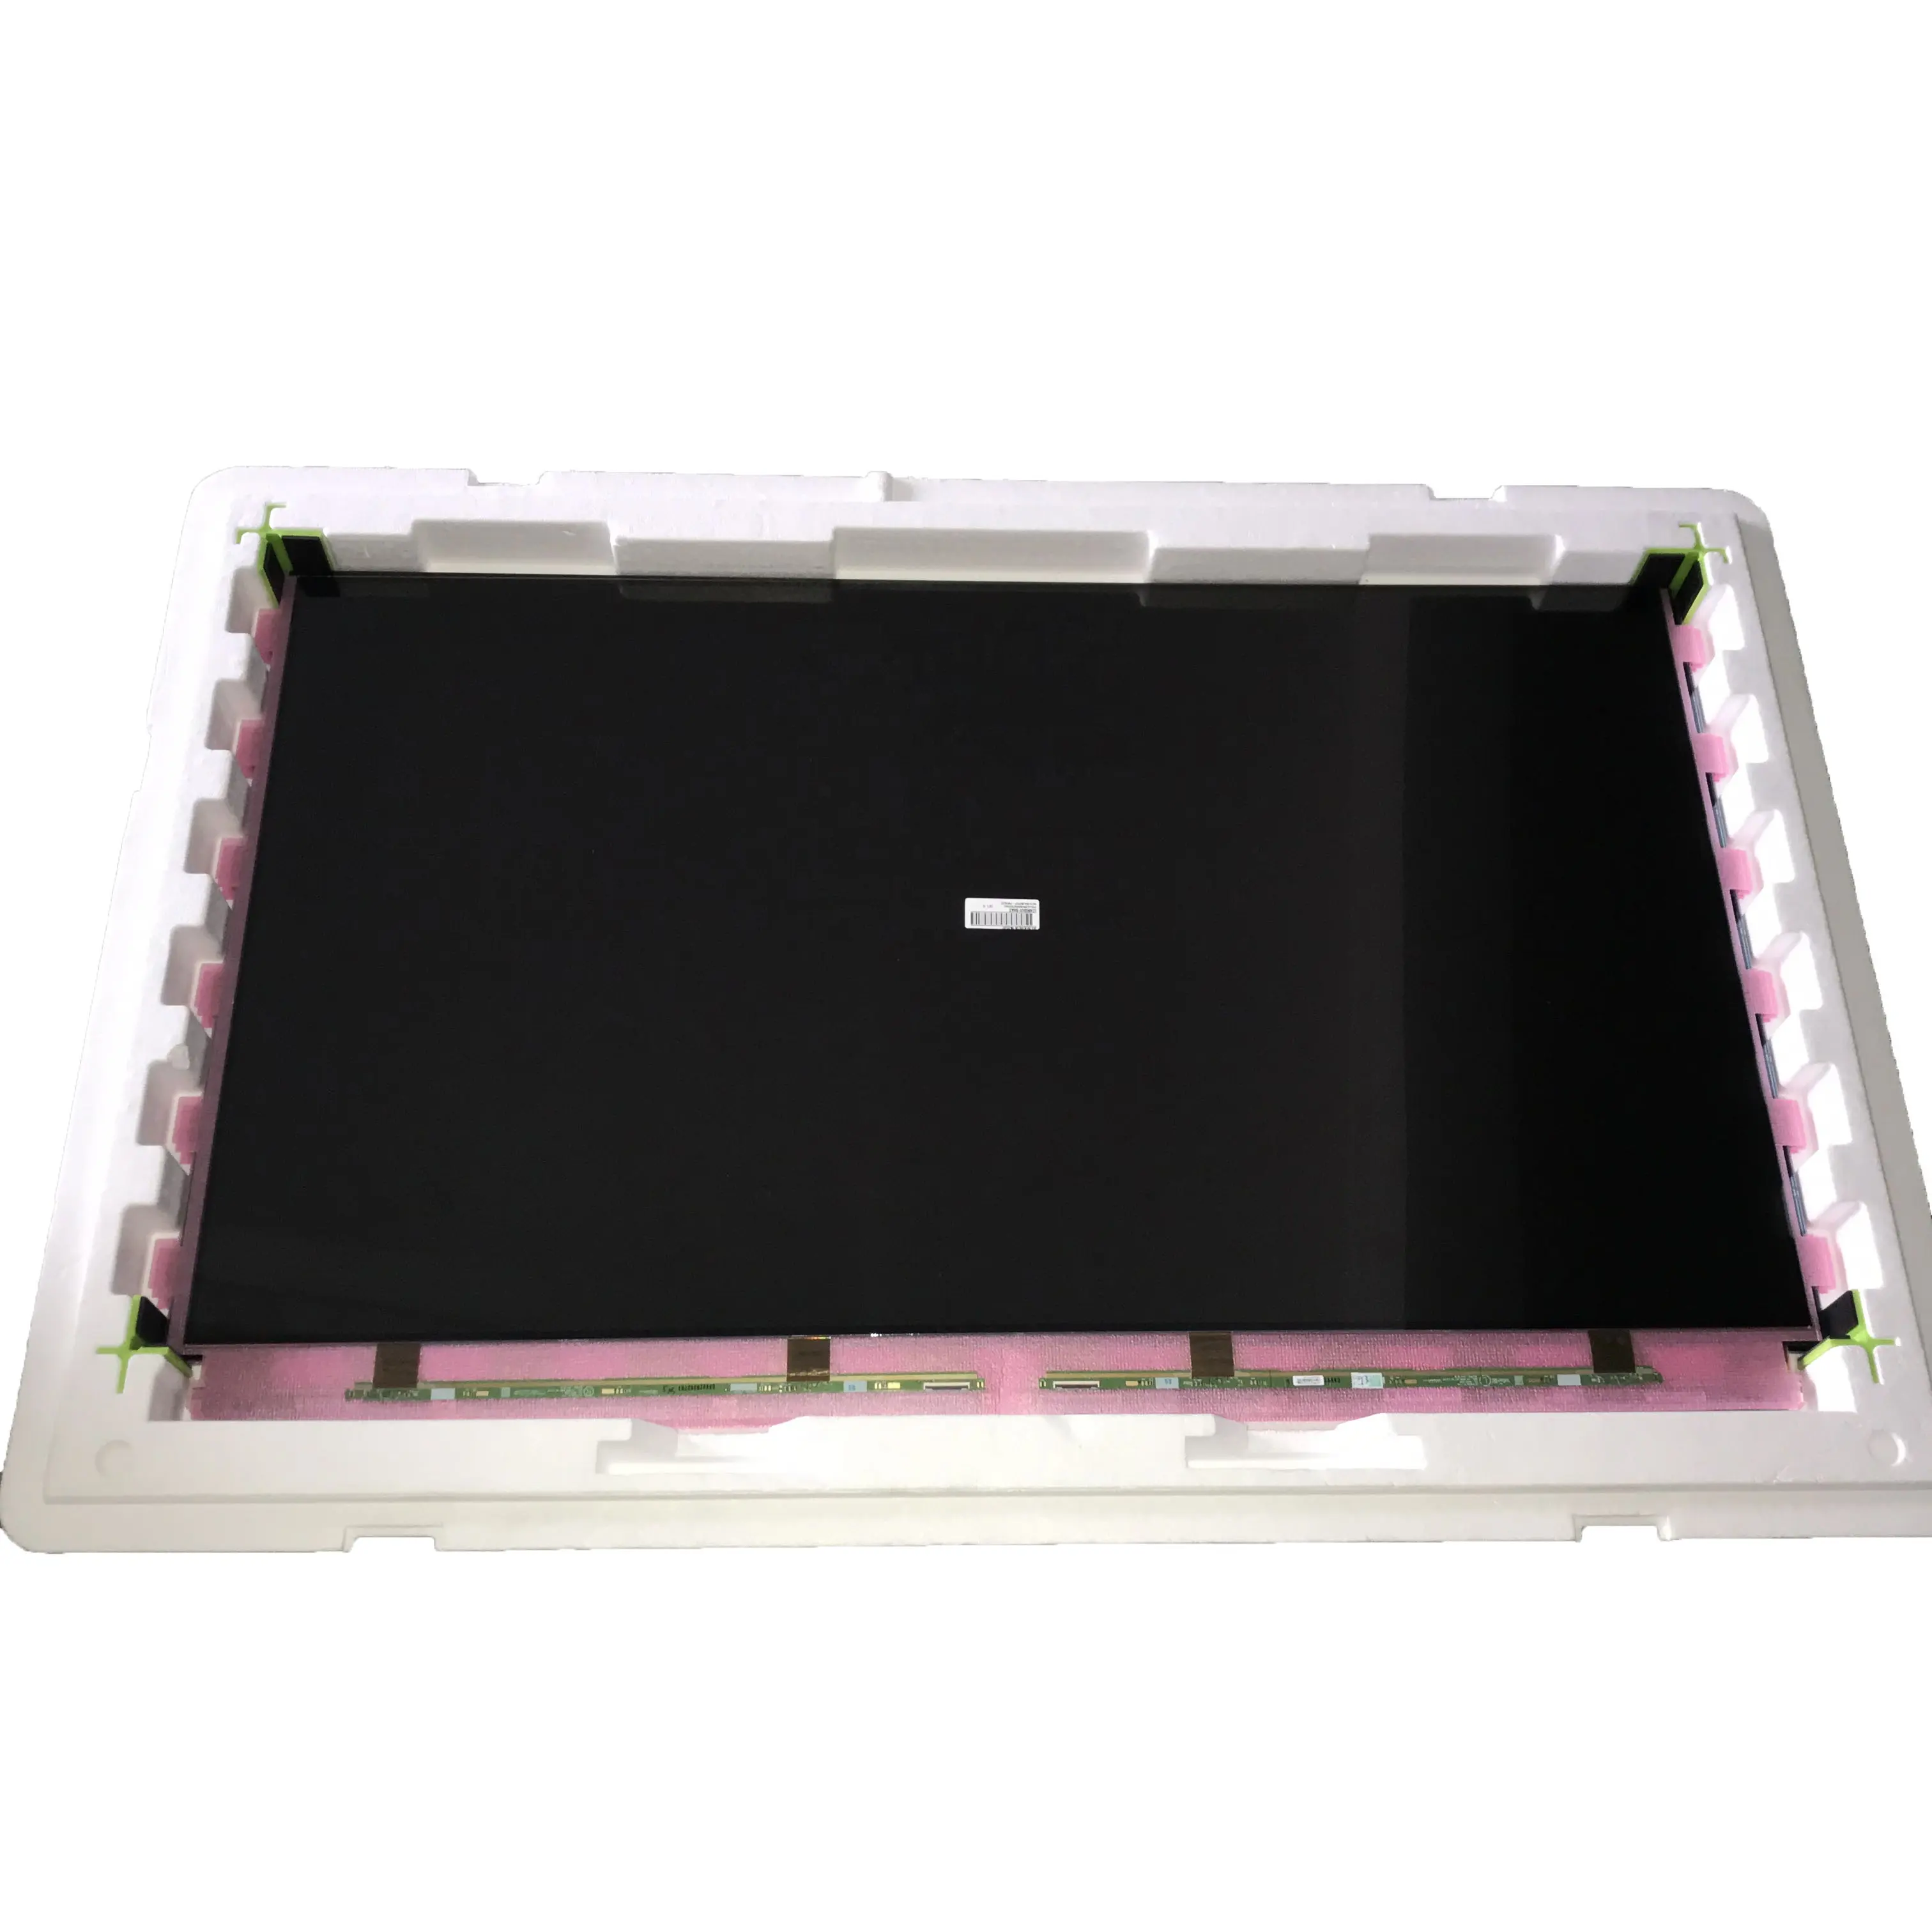 Made in China for LG Display panel models LC490DUYSHA2 6870S-1936A